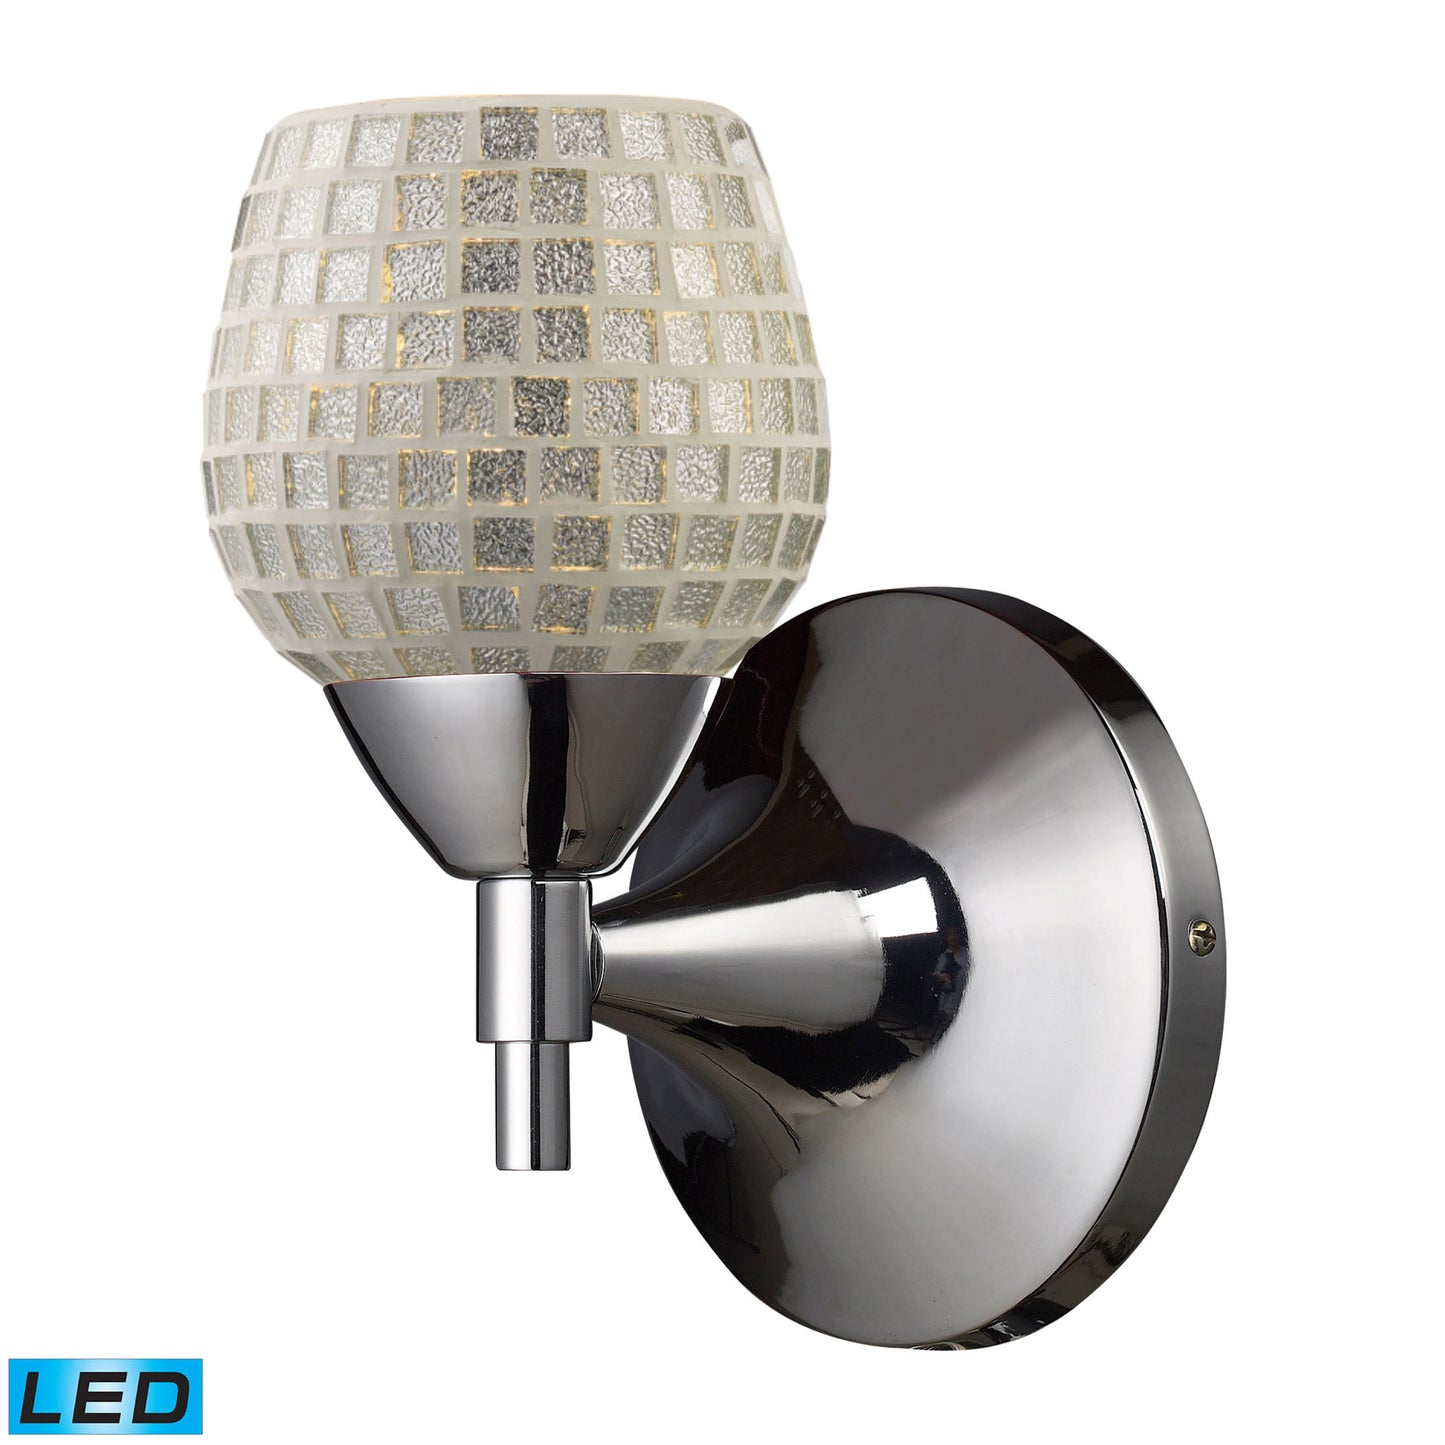 Celina 1-Light Wall Lamp in Polished Chrome with Silver Glass - Includes LED Bulb